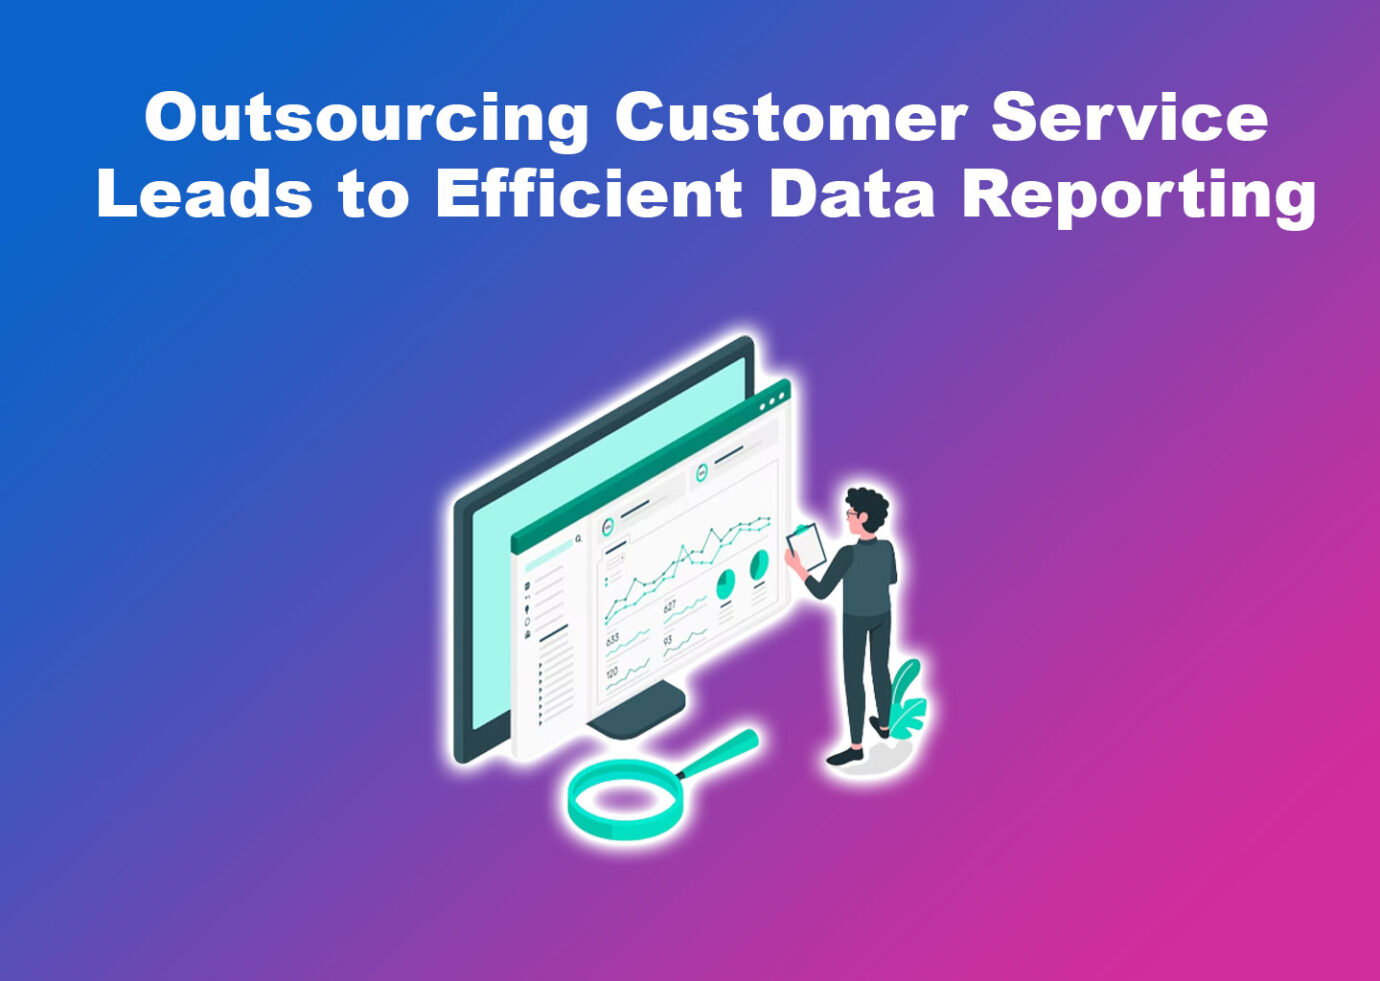 Outsourcing Customer Service Leads to Efficient Data Reporting